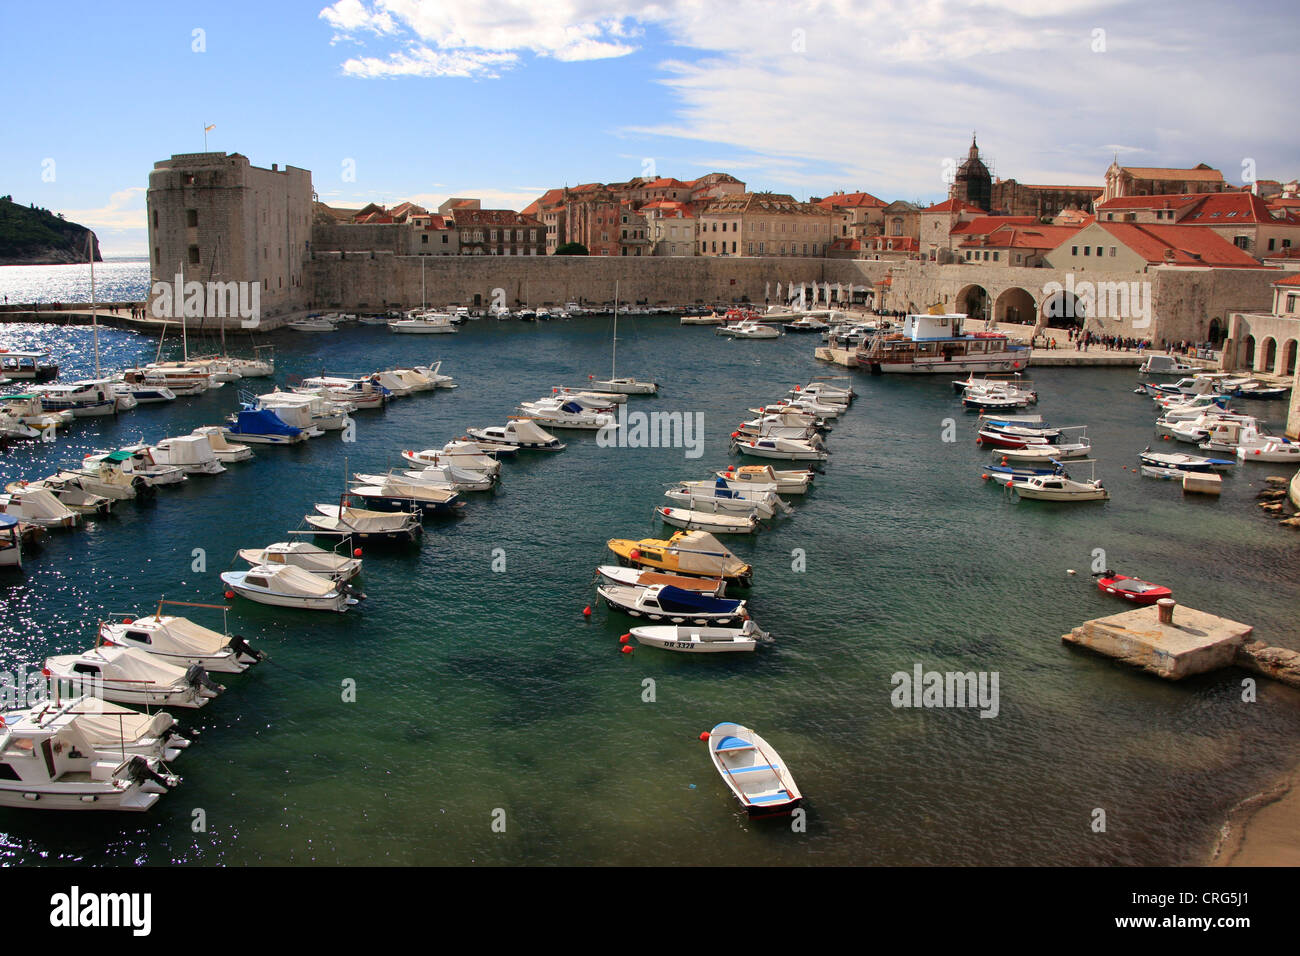 The Old Harbour at Dubrovnik, Croatia Stock Photo